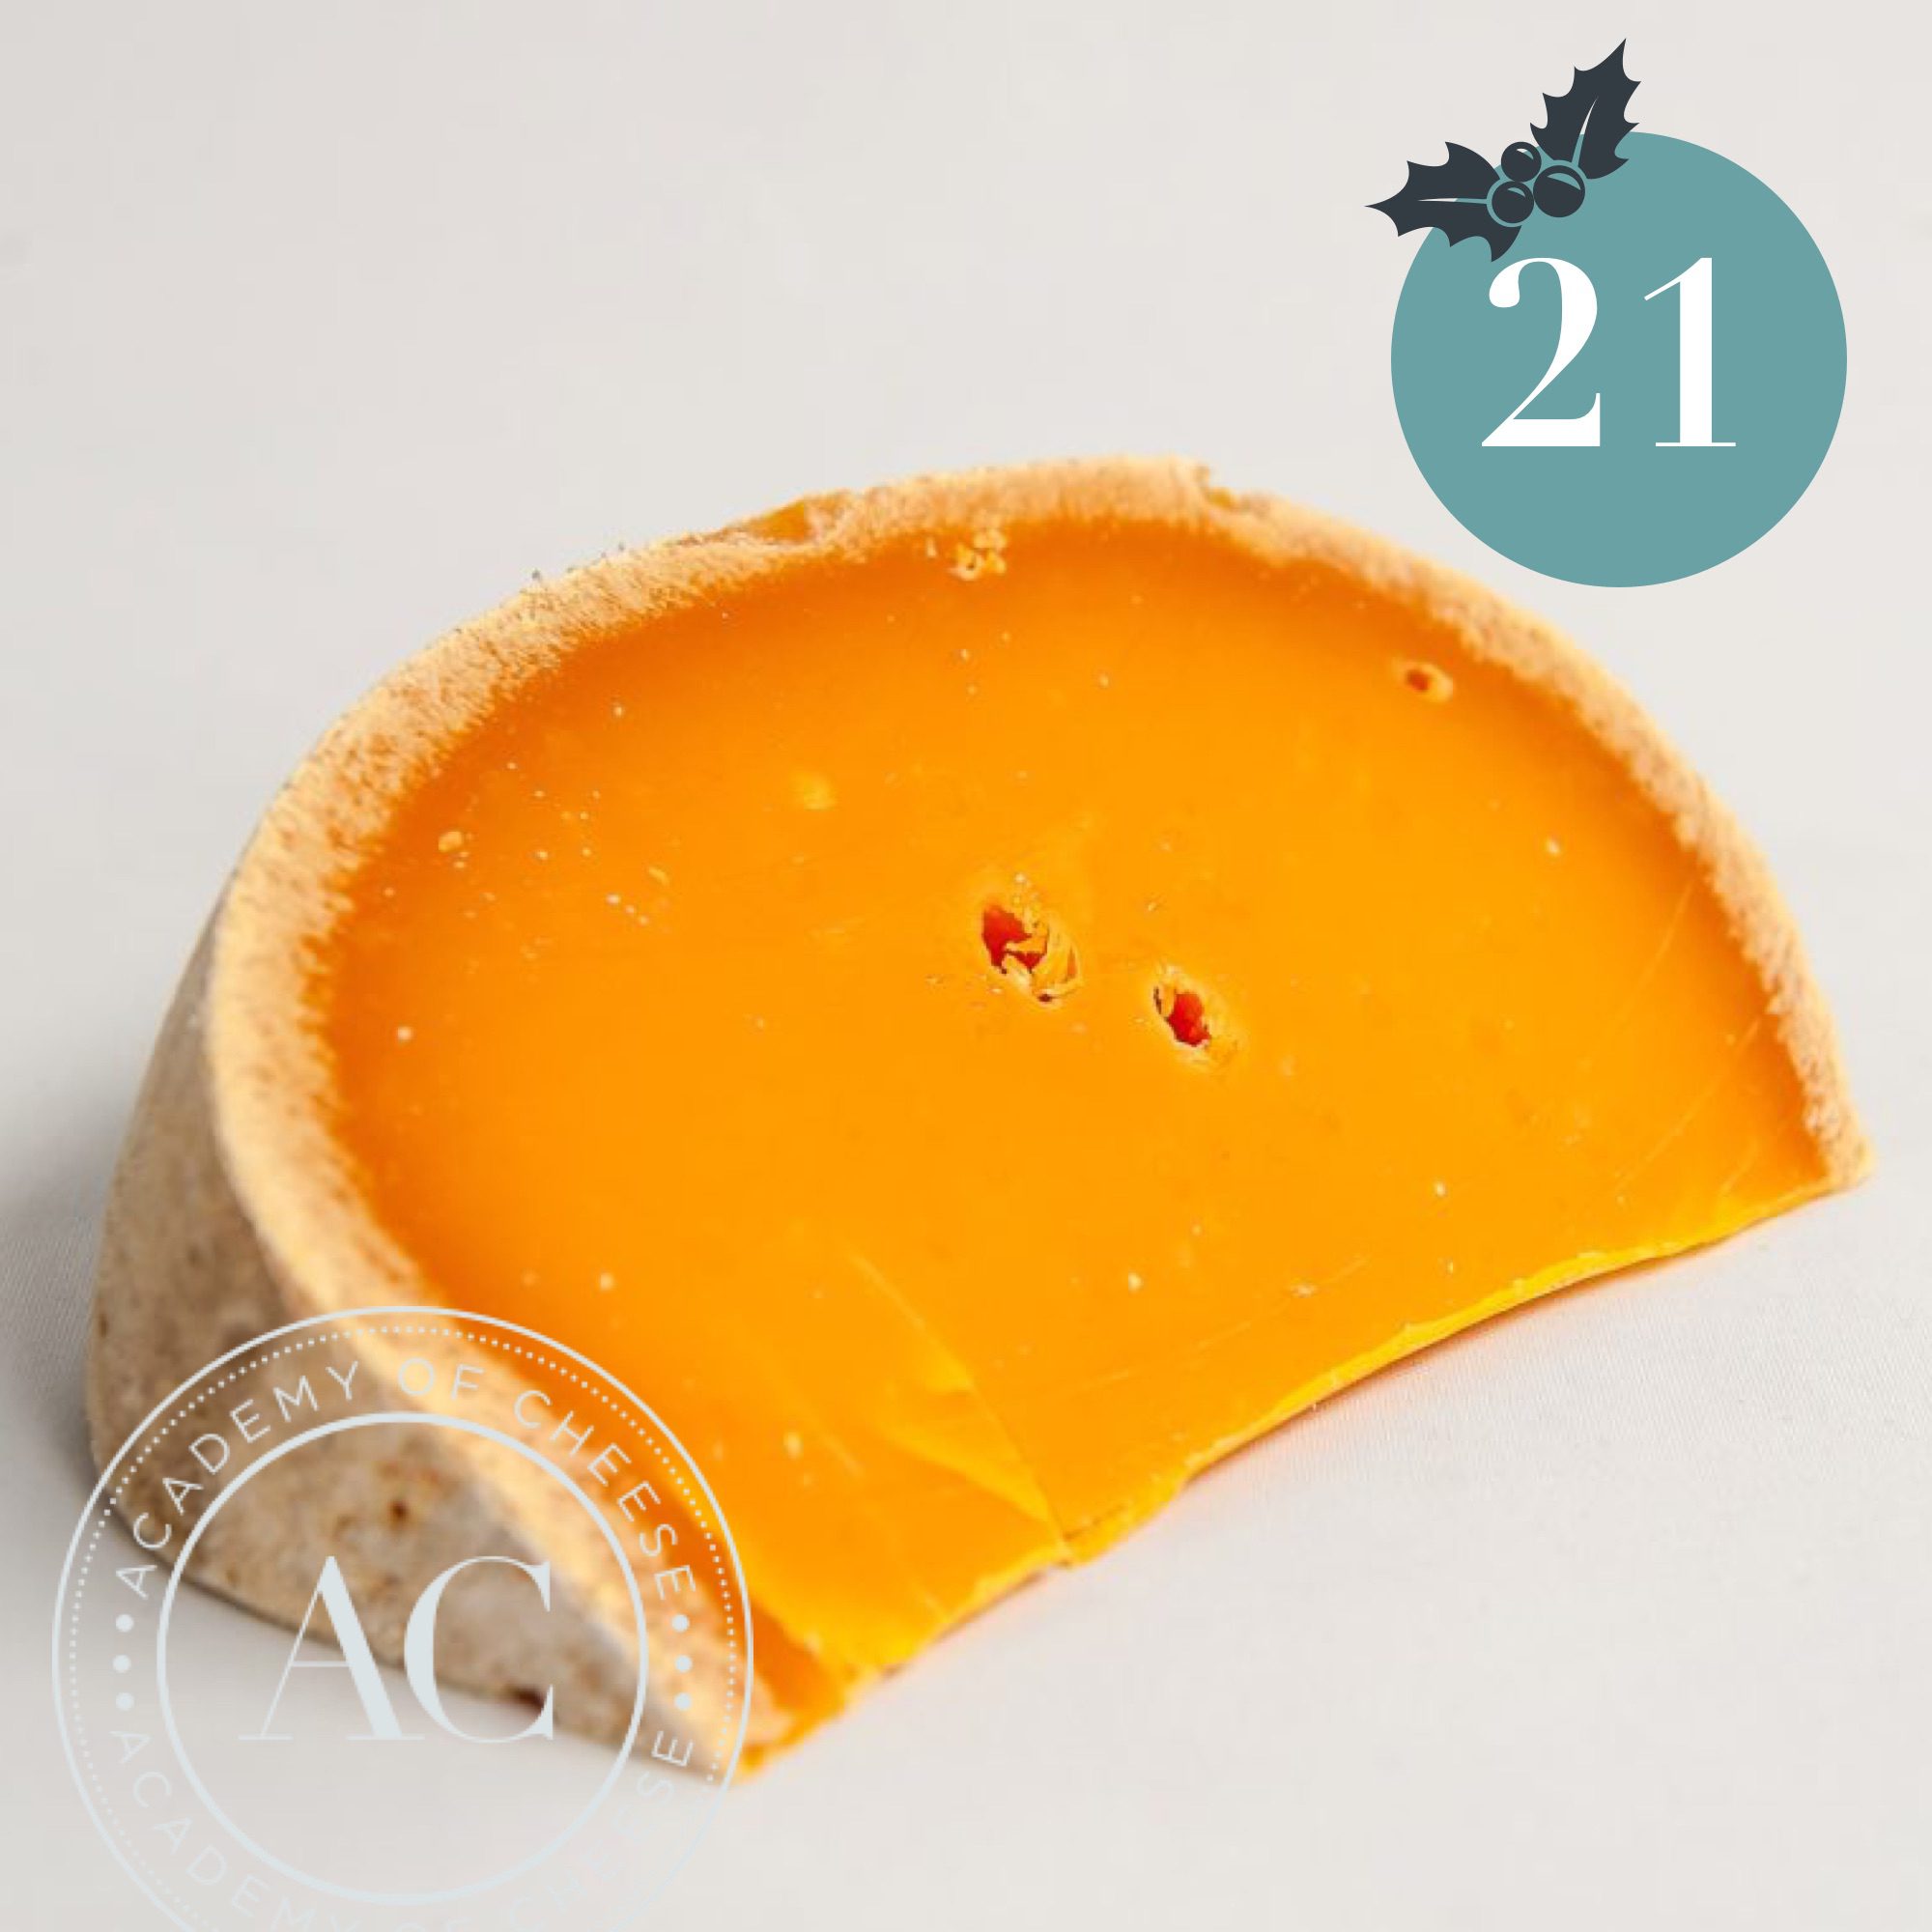 Mimolette Academy Of Cheese 